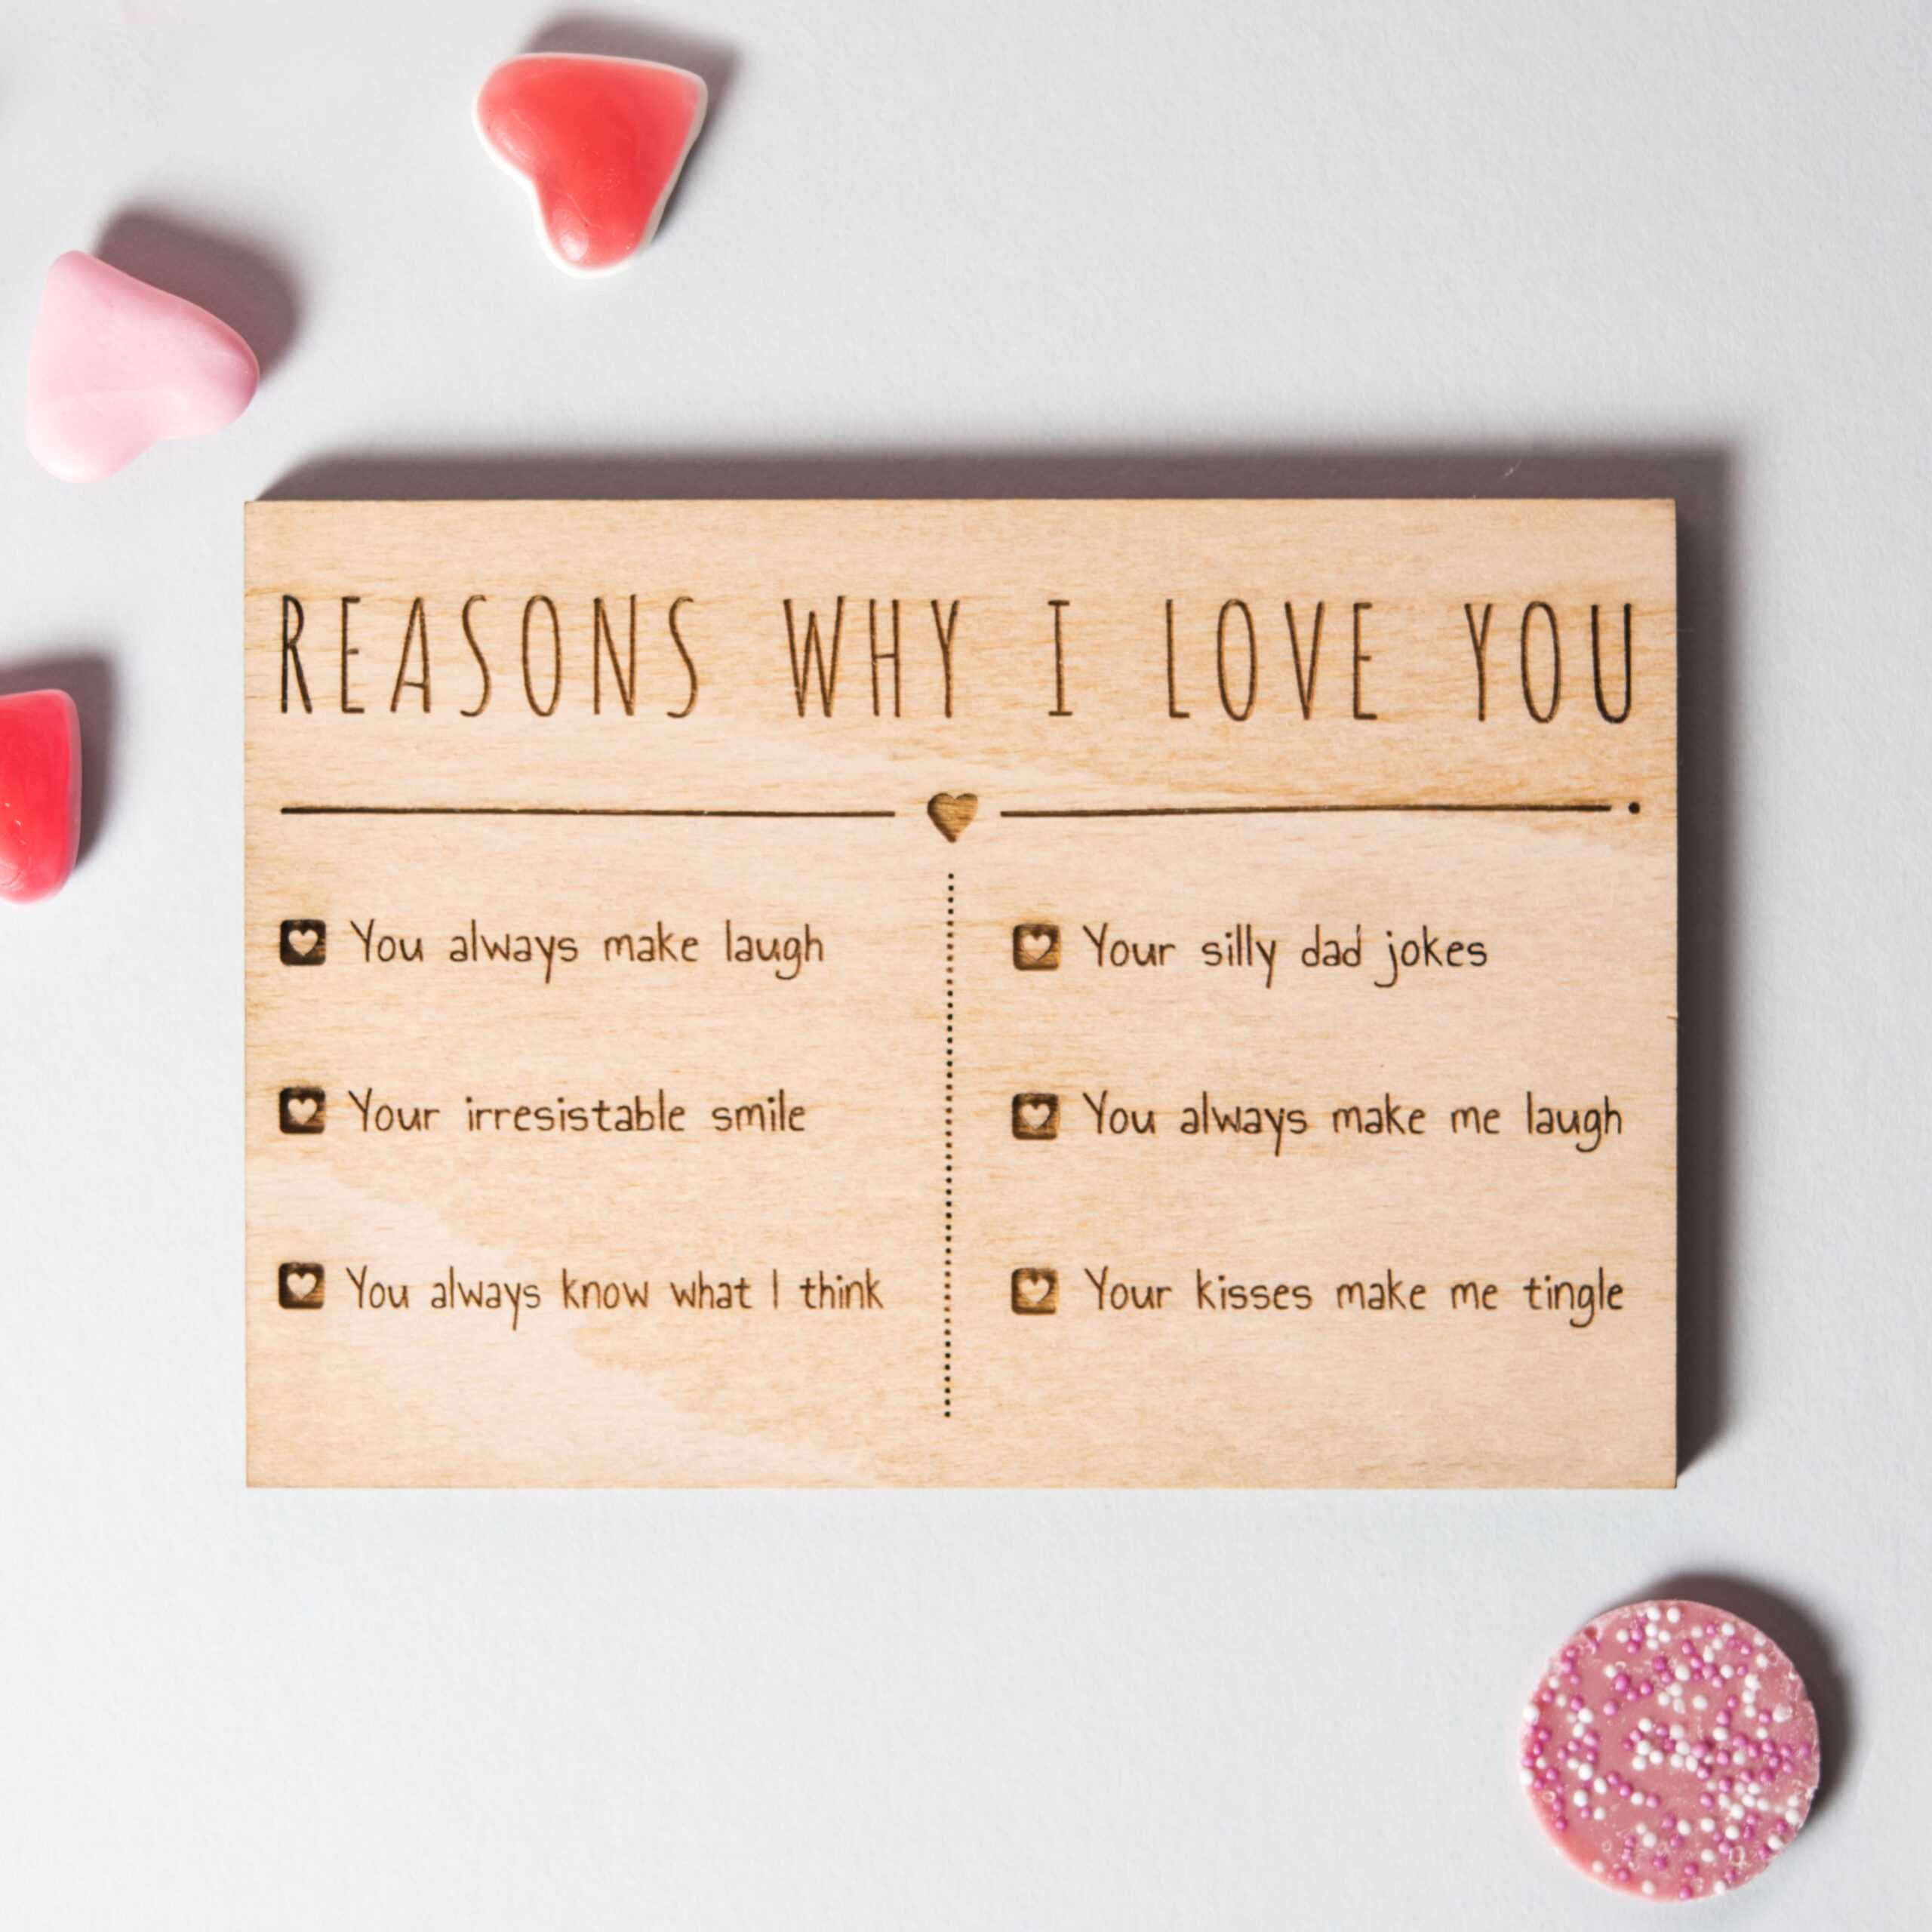 Reasons Why I Love You – Milas.westernscandinavia Inside 52 Things I Love About You Cards Template